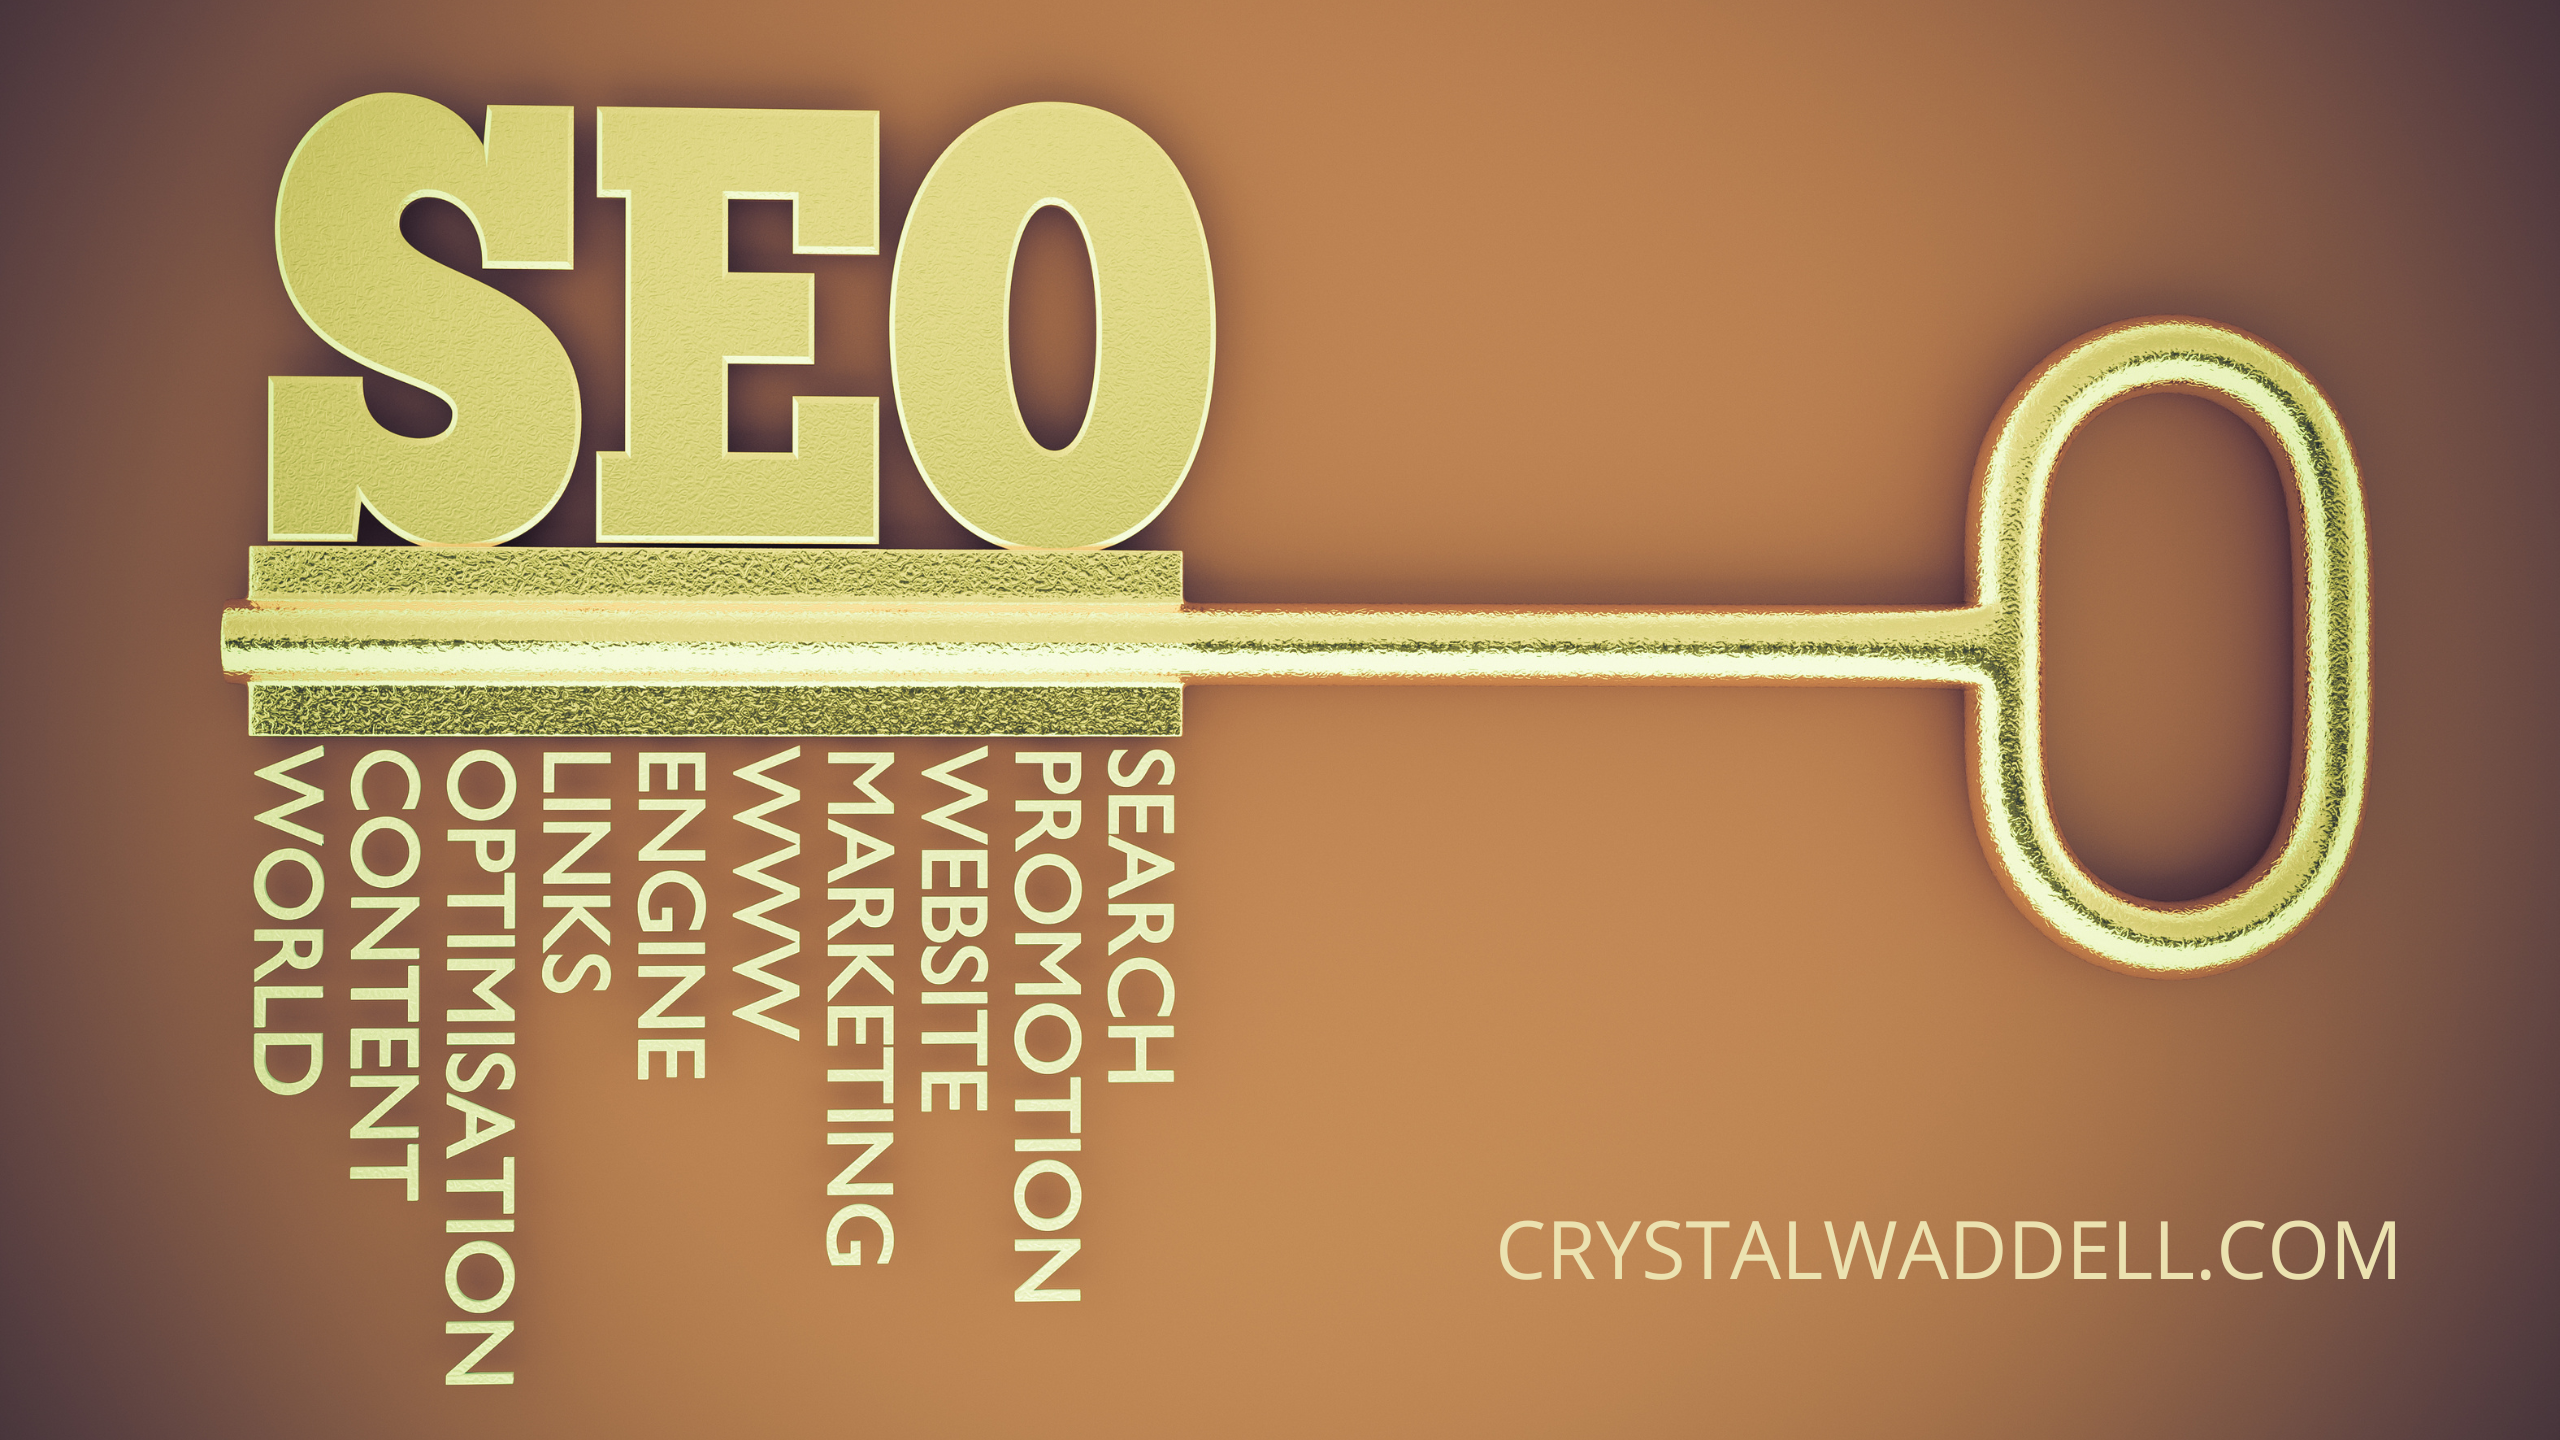 Increase your organic traffic by having a general understanding of SEO terminology.